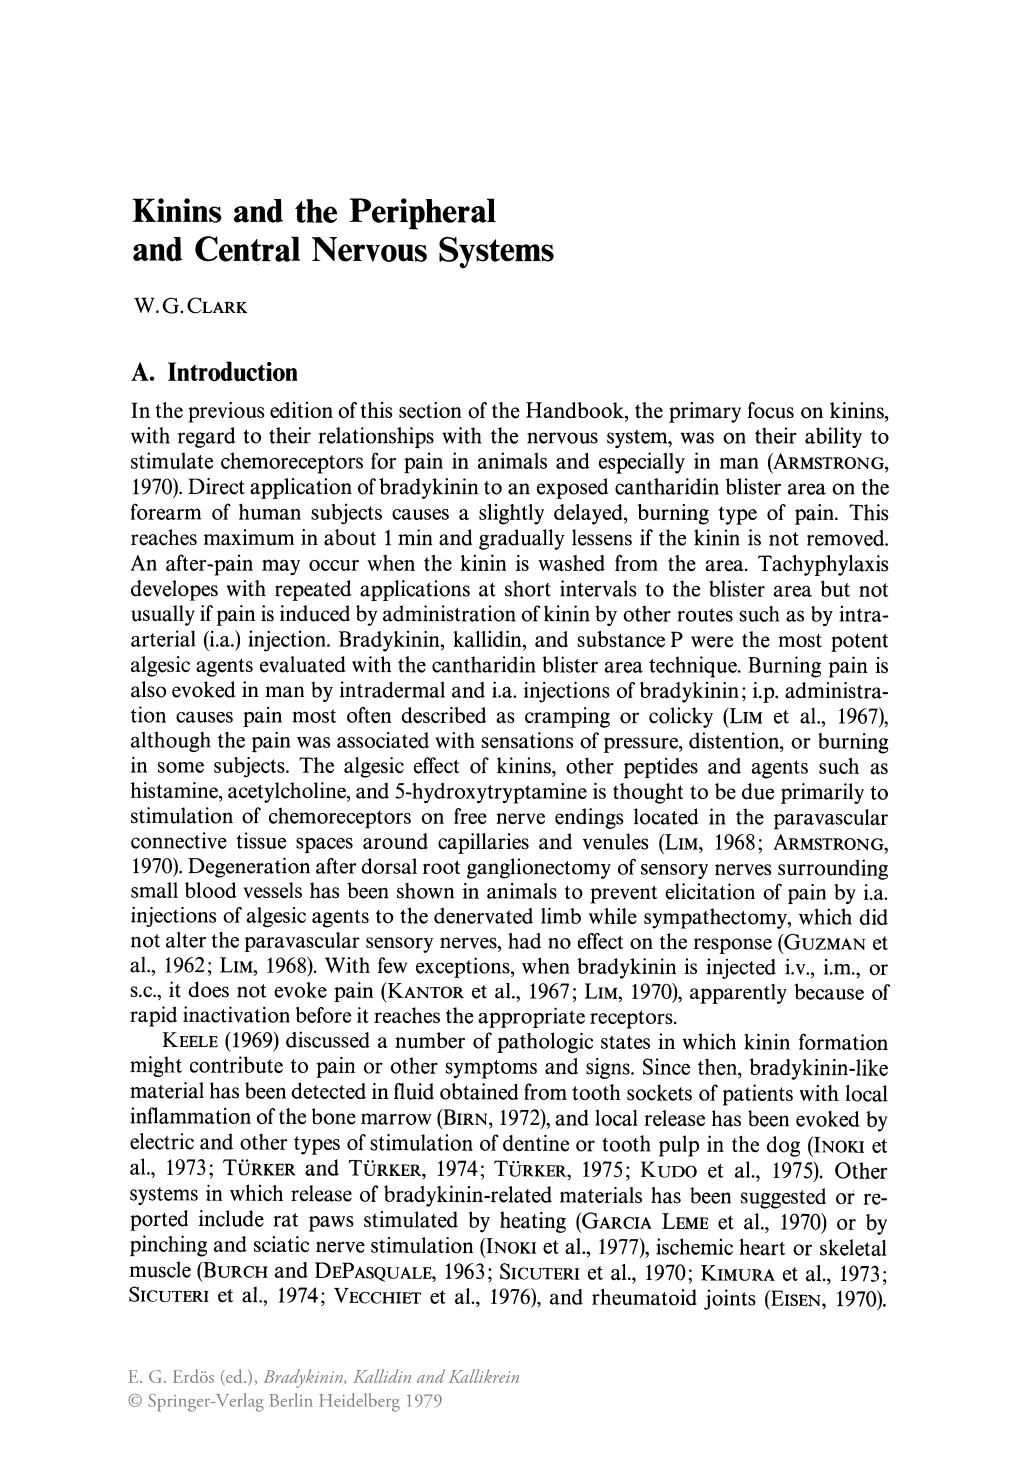 Kinins and the Peripheral and Central Nervous Systems